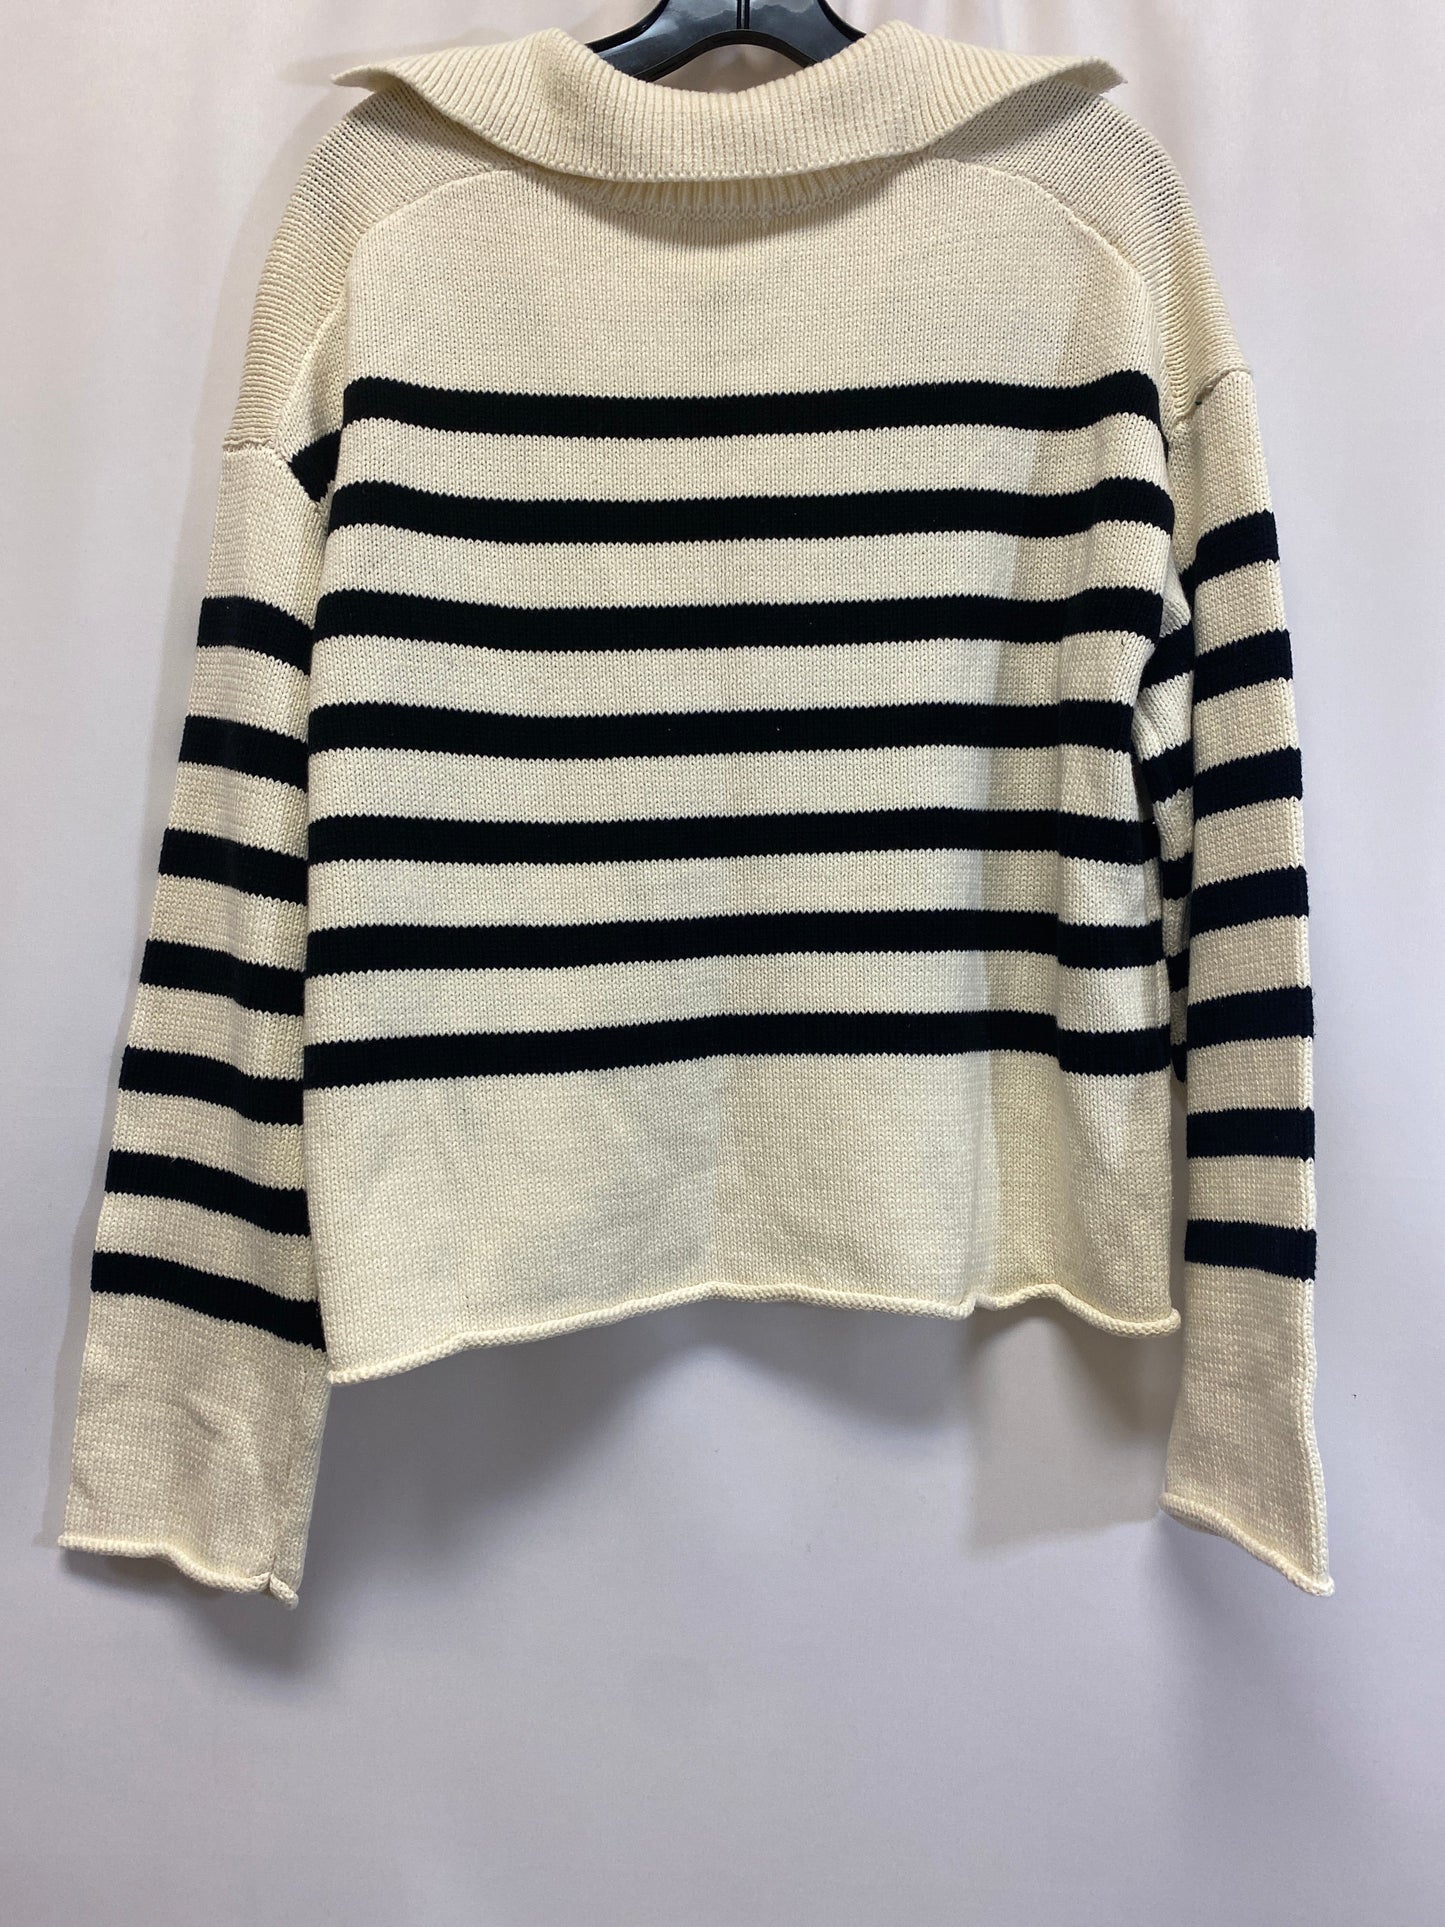 Tan Sweater Maurices, Size M